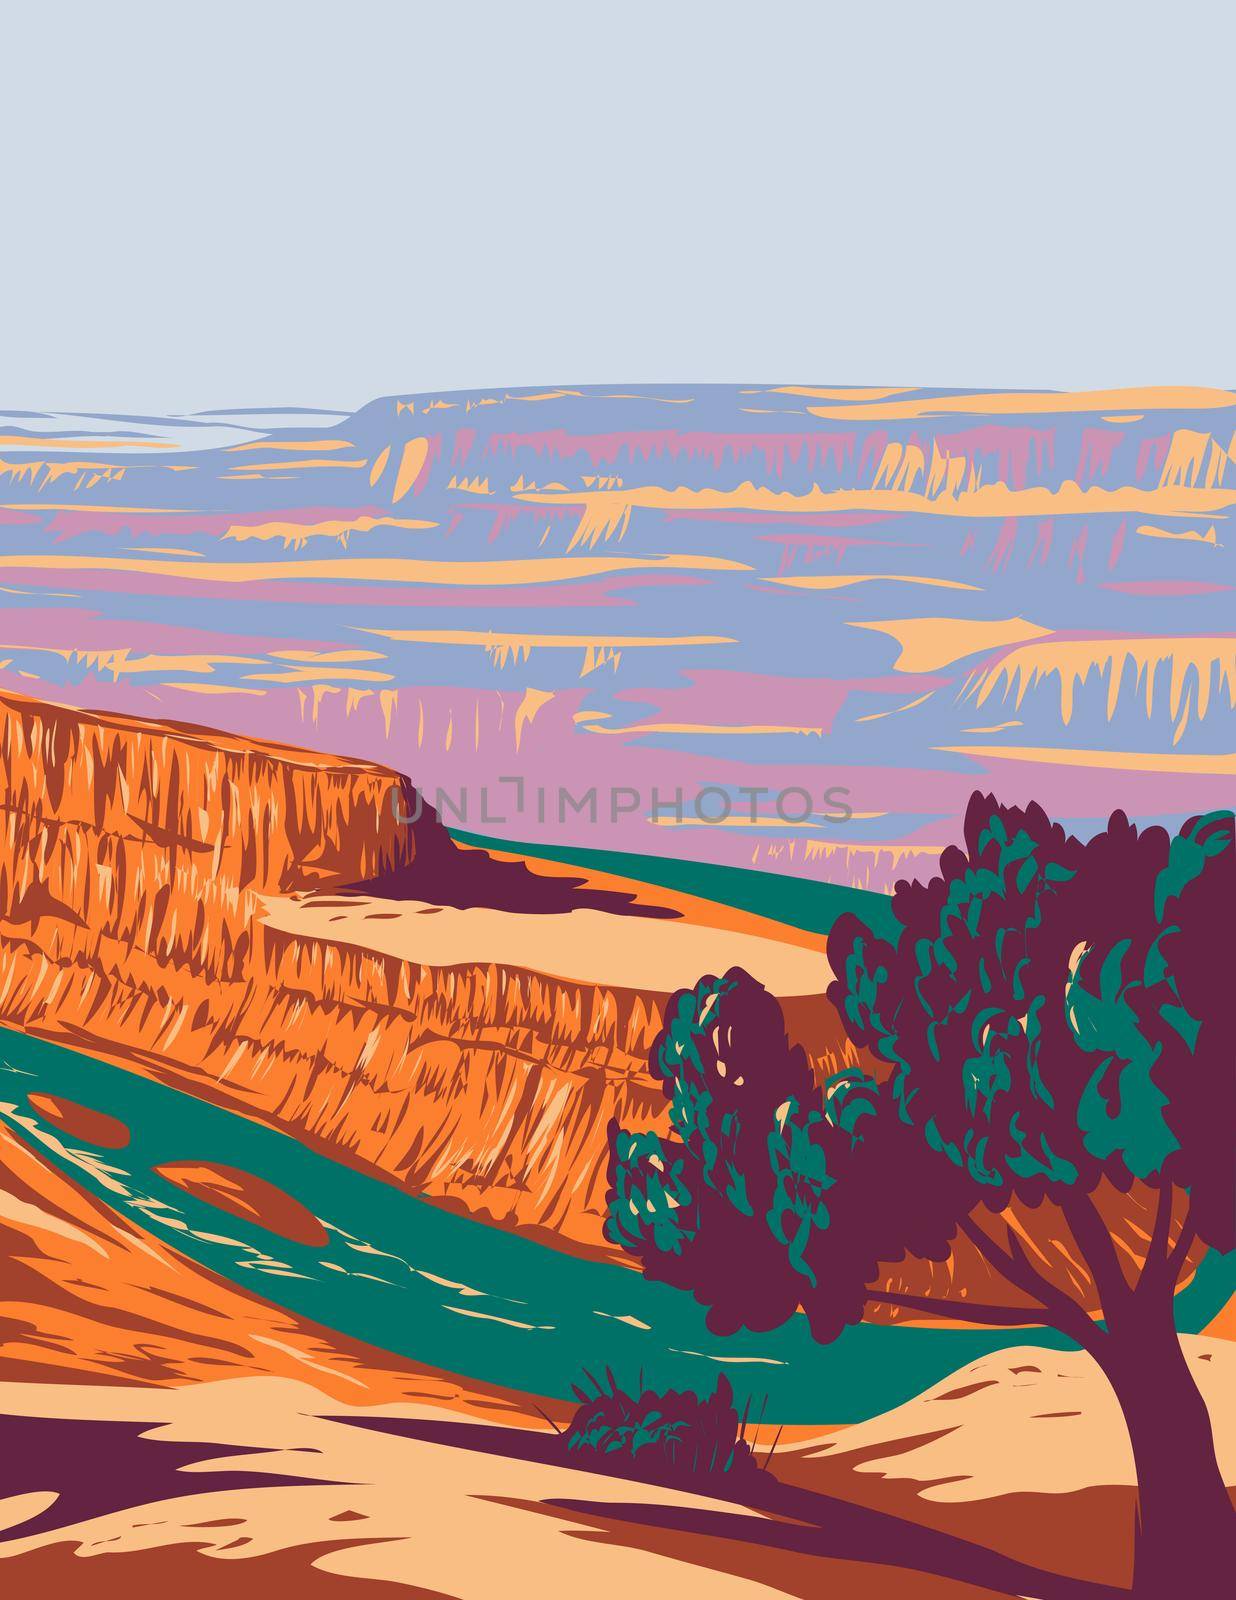 WPA poster art of Dead Horse Point State Park with a dramatic overlook of the Colorado River and Canyonlands National Park Utah United States of America USA done in works project administration style.